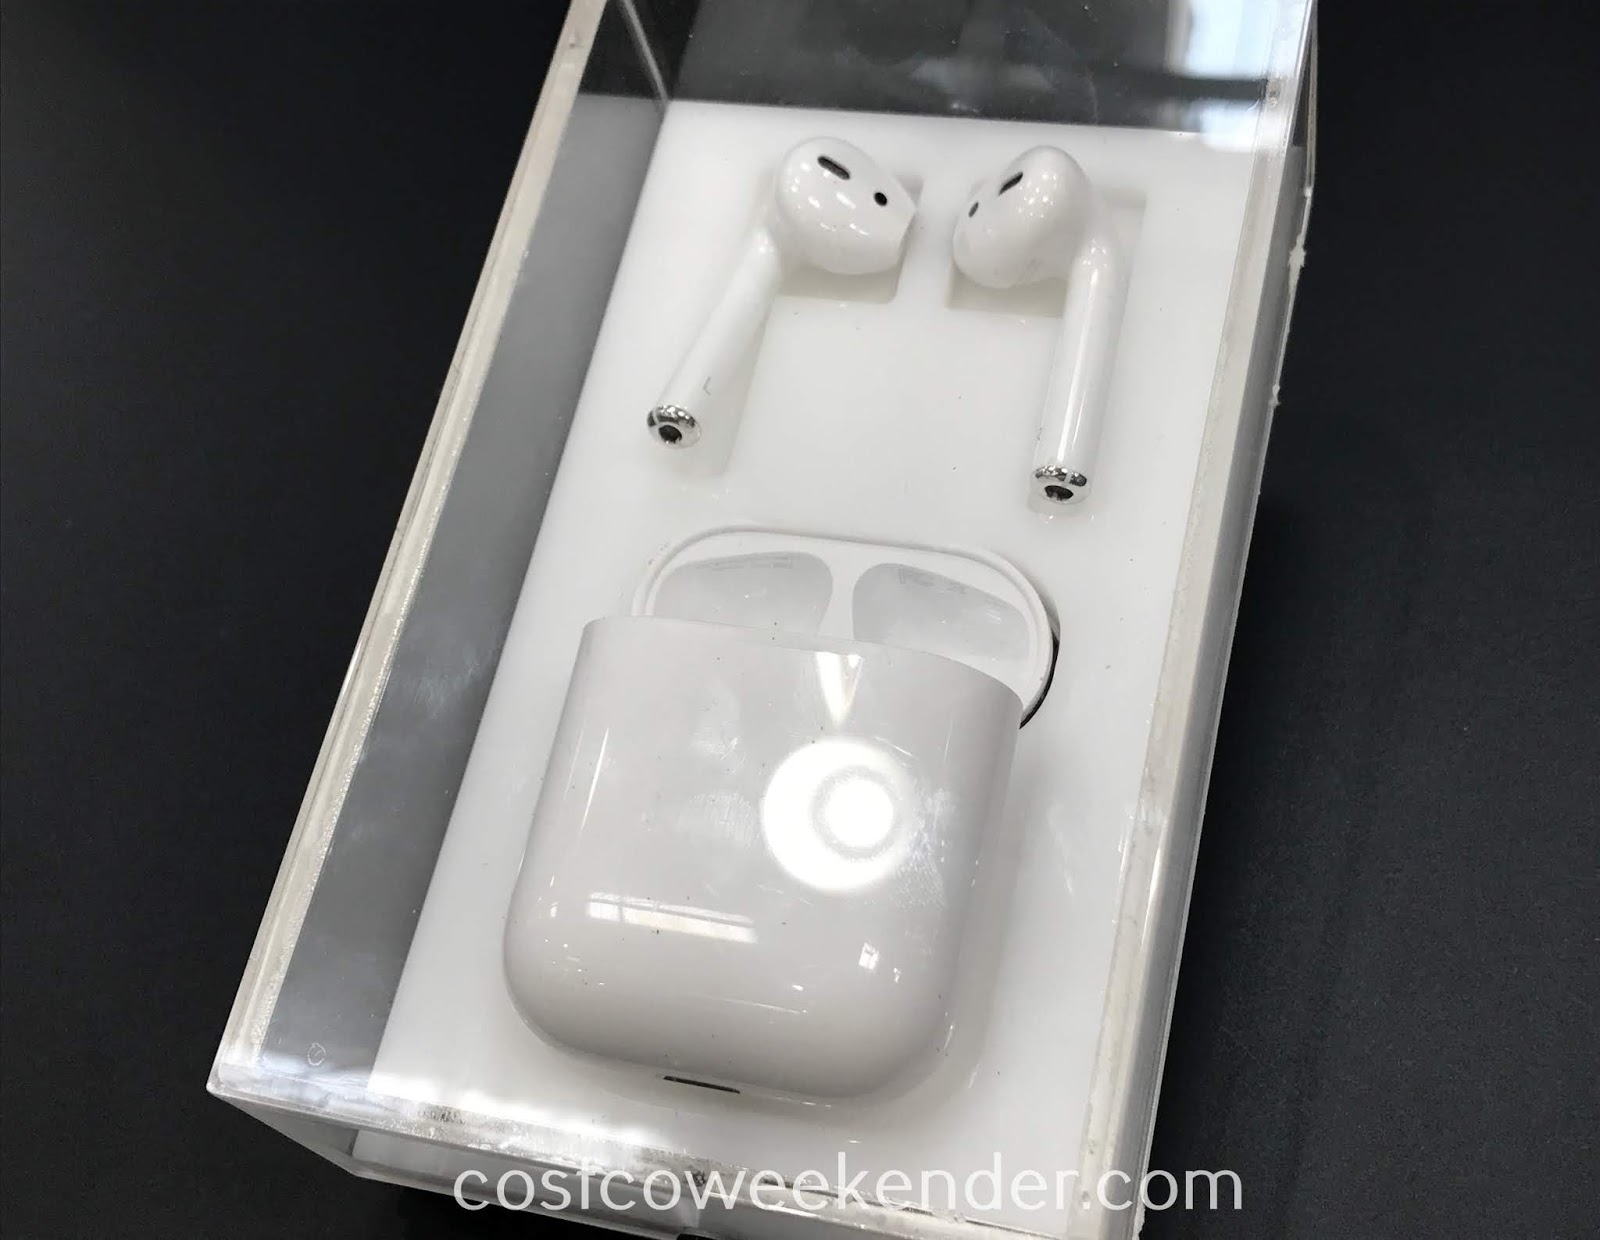 How Much Are Airpods Costco ~ Kristy Sherman